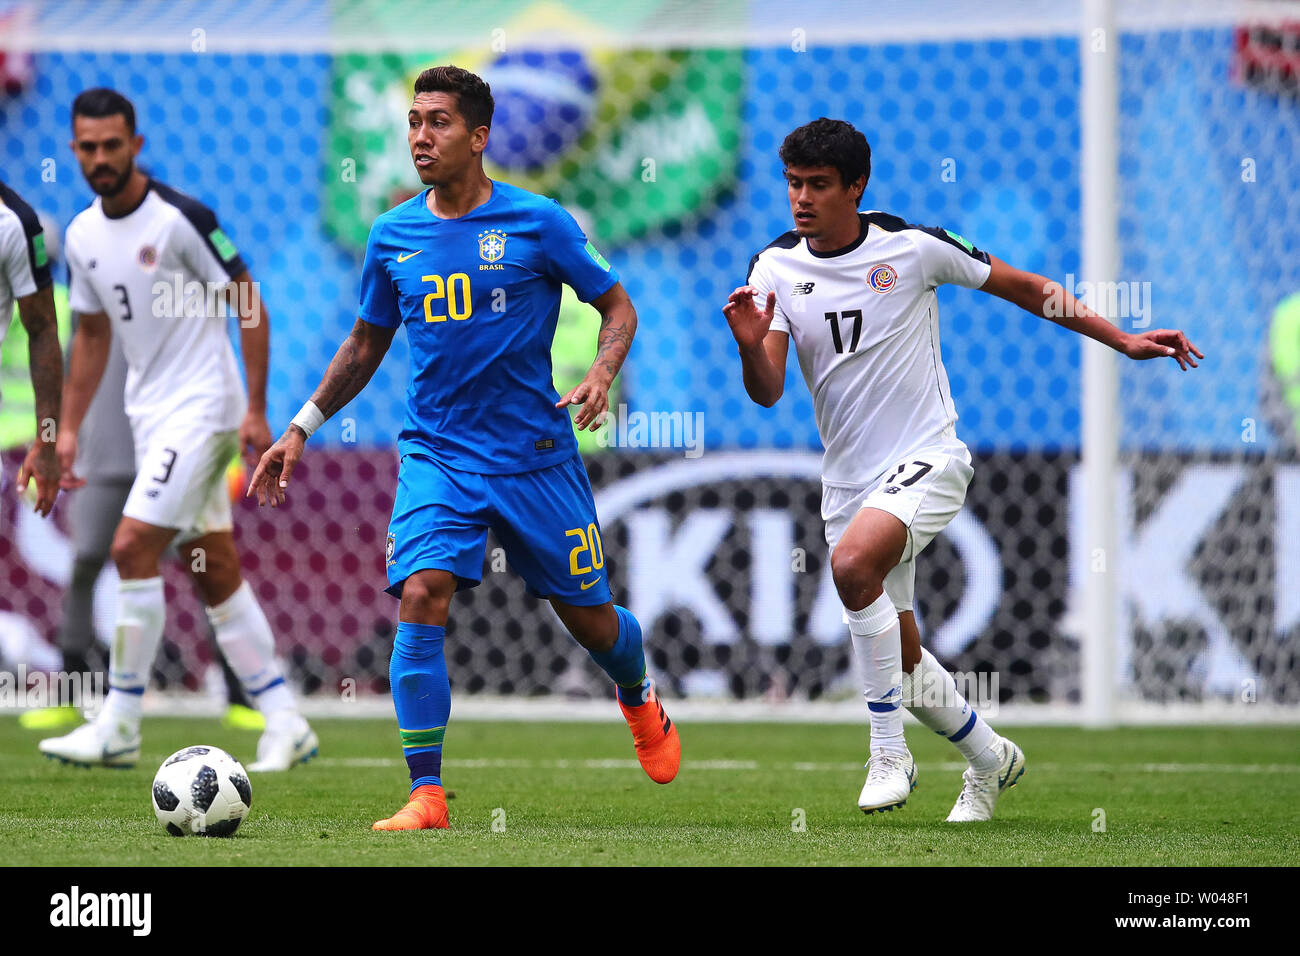 Roberto Firmino (L) of Brazil in action with Yeltsin Tejeda of Costa Rica during the 2018 FIFA World Cup Group E match at the Saint Petersburg Stadium in Saint Petersburg, Russia on June 22, 2018. Photo by Chris Brunskill/UPI Stock Photo